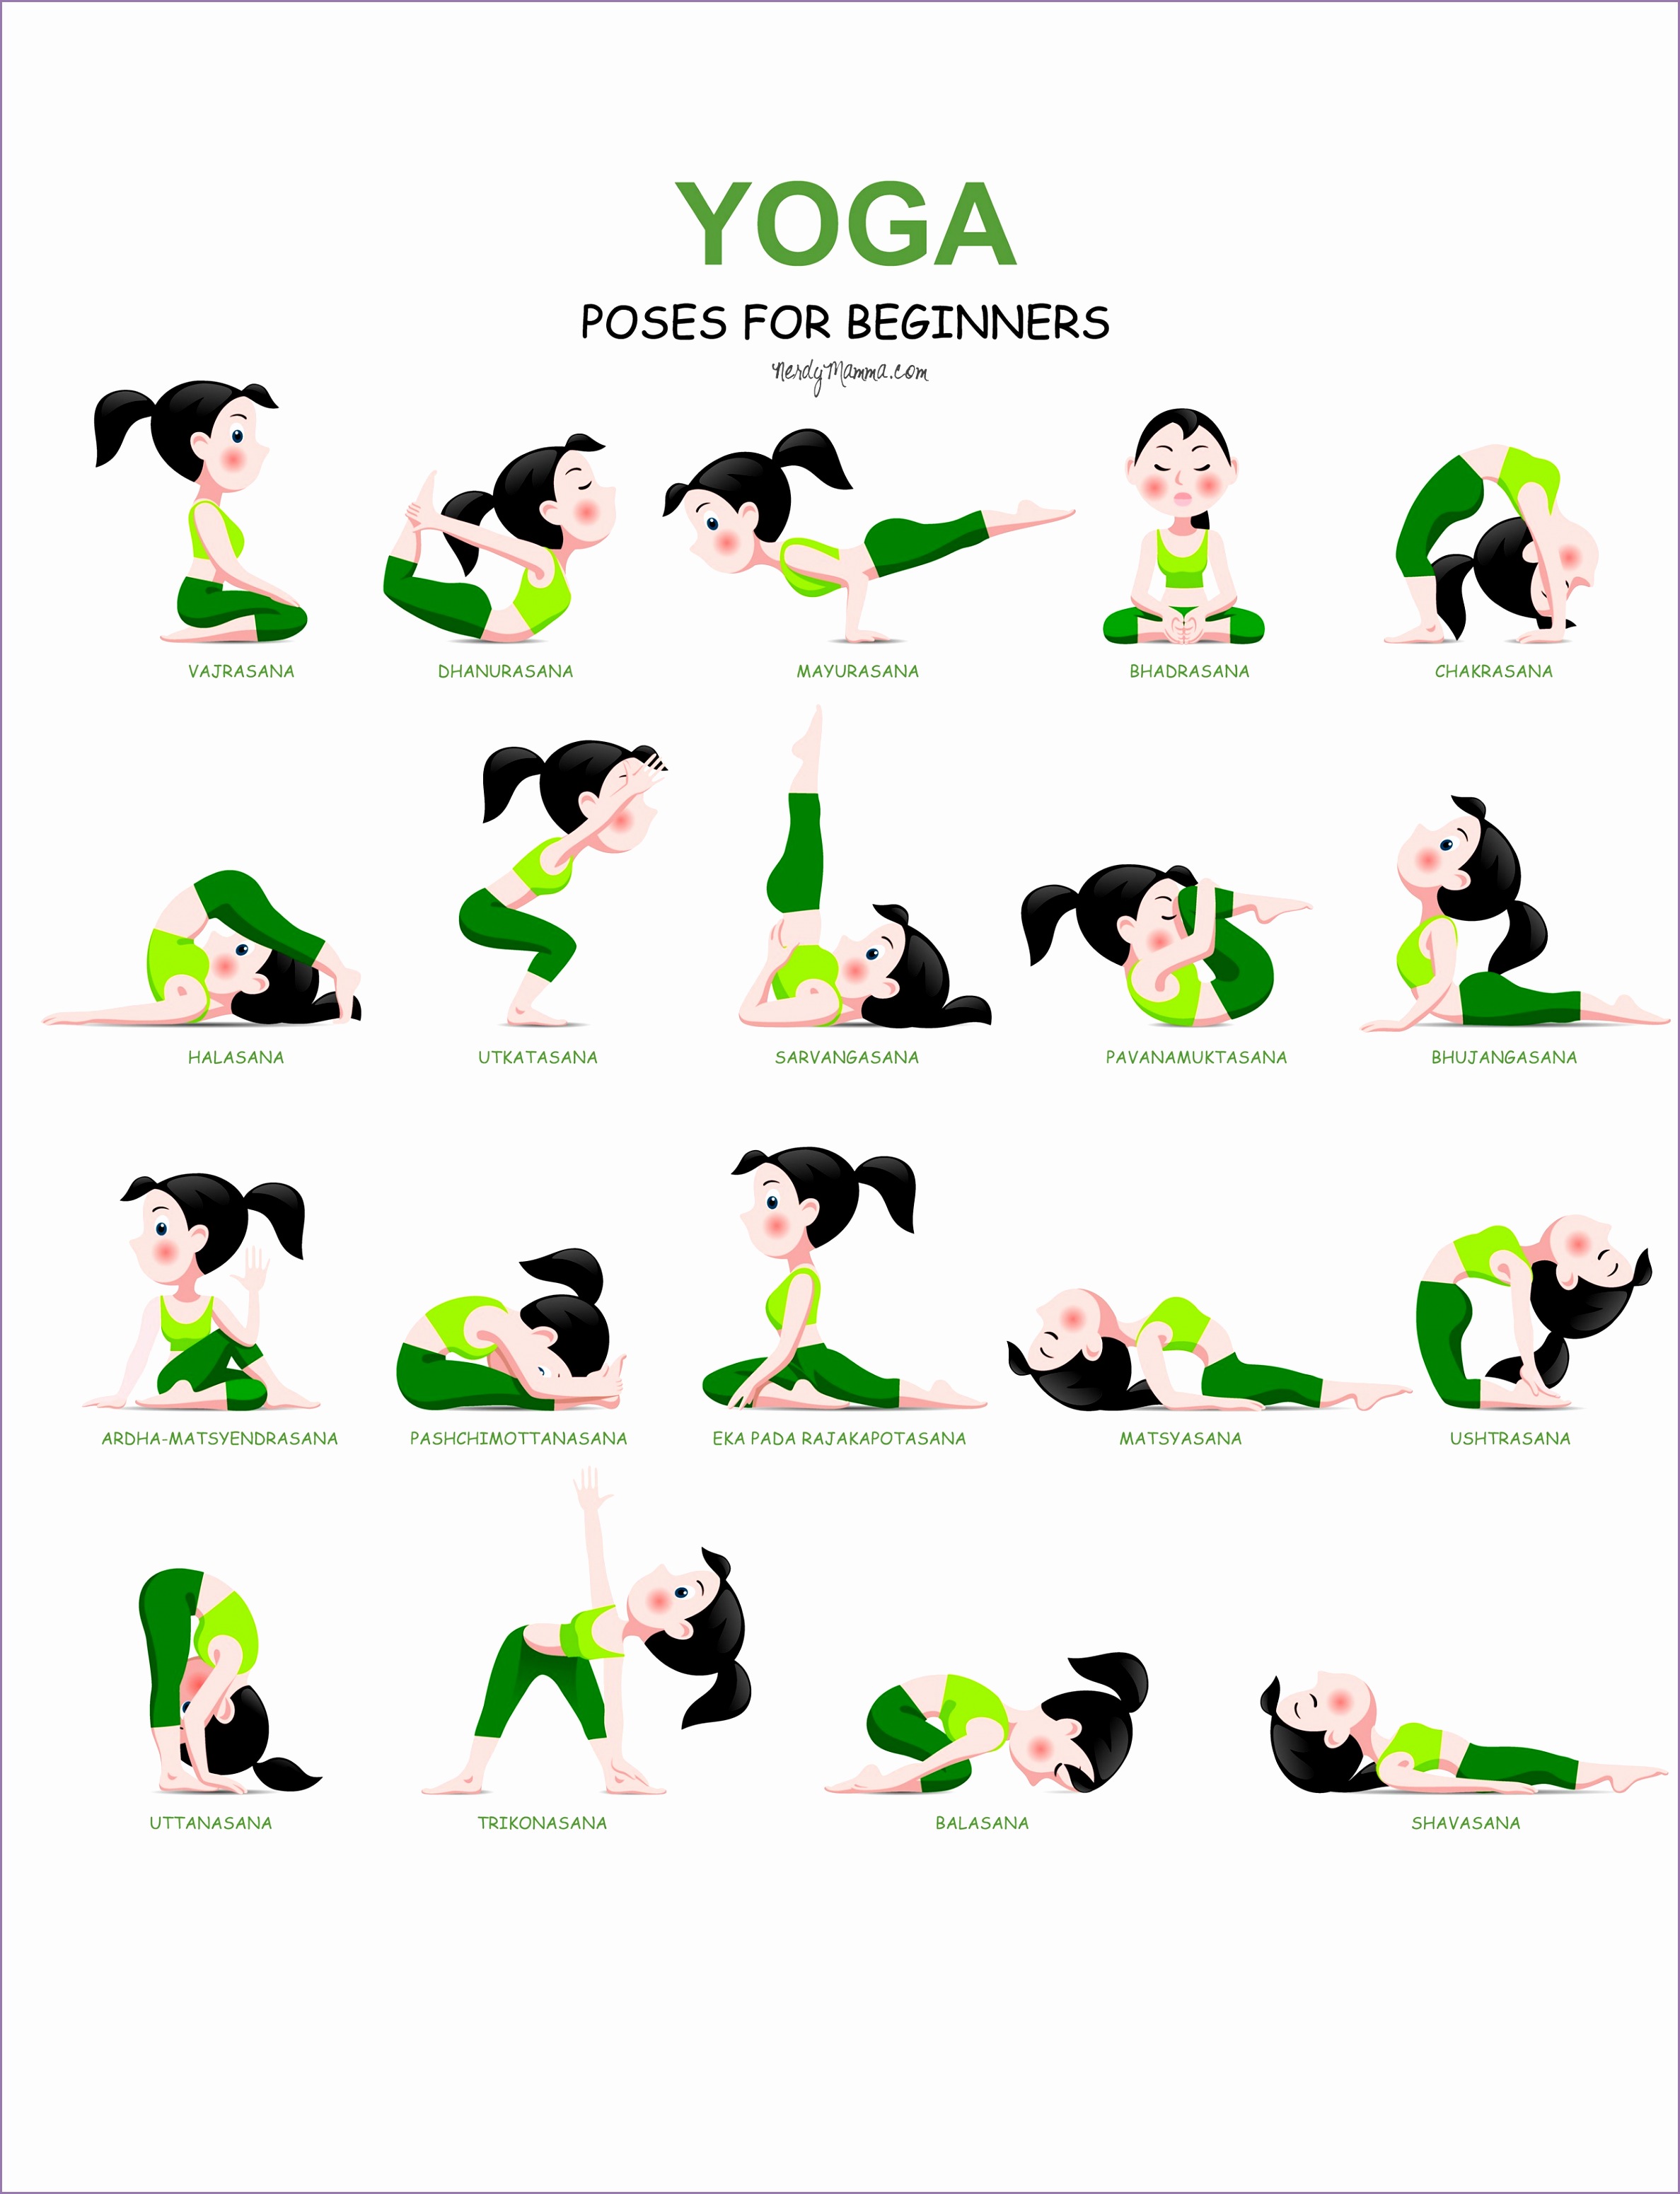 A Basic Yoga Session need not take too long A basic session usually follows this order